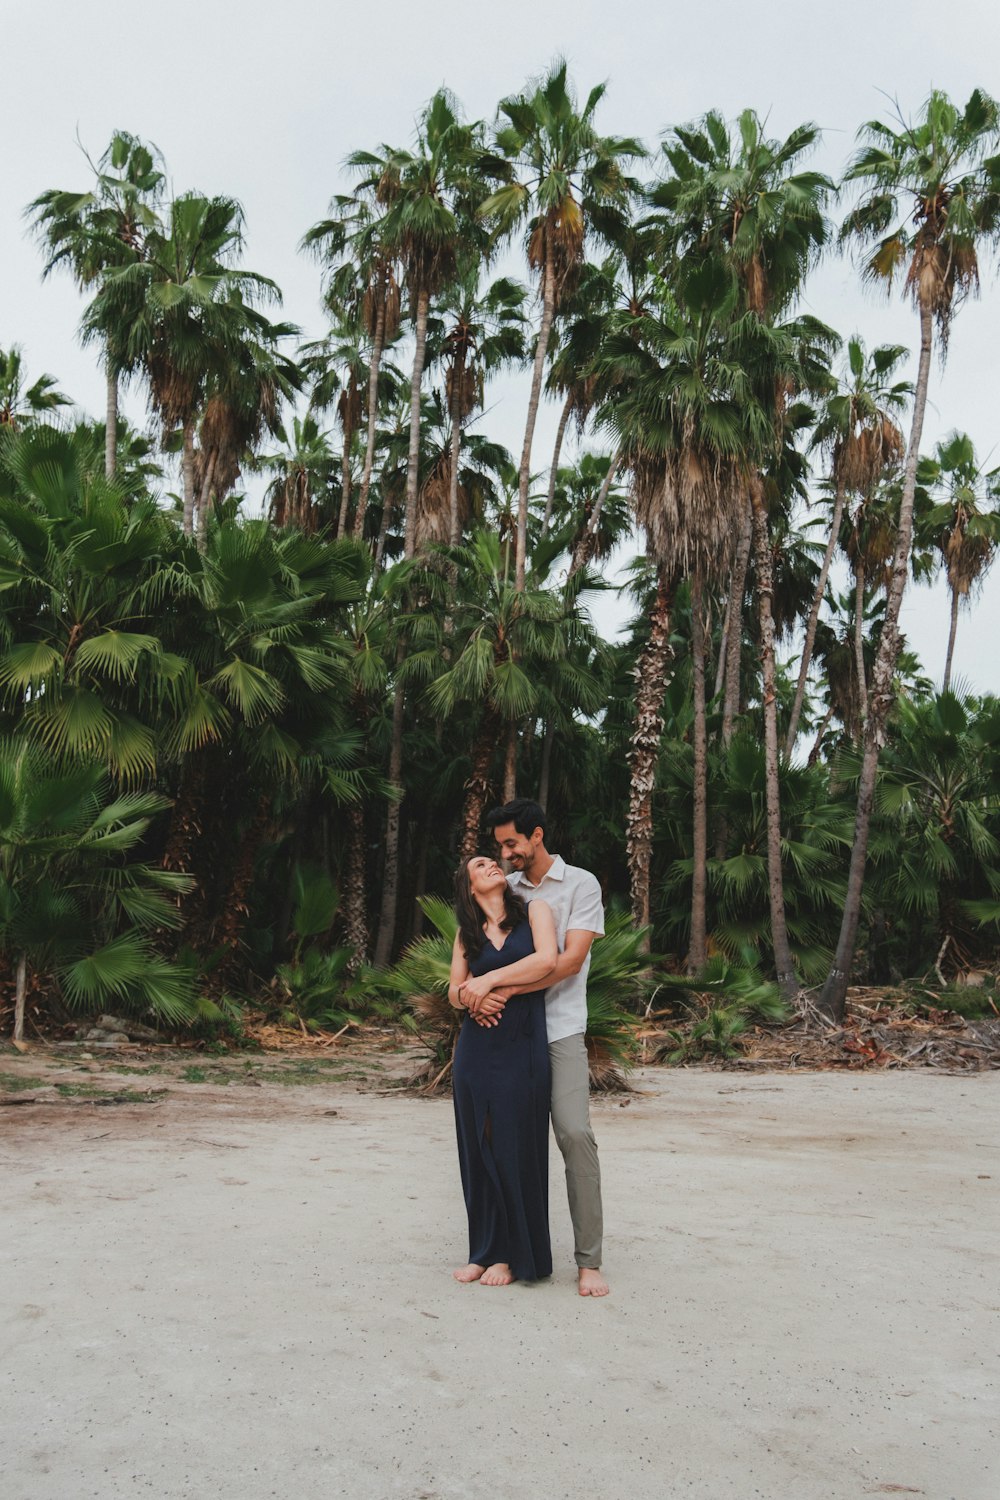 a man and woman standing in front of palm trees